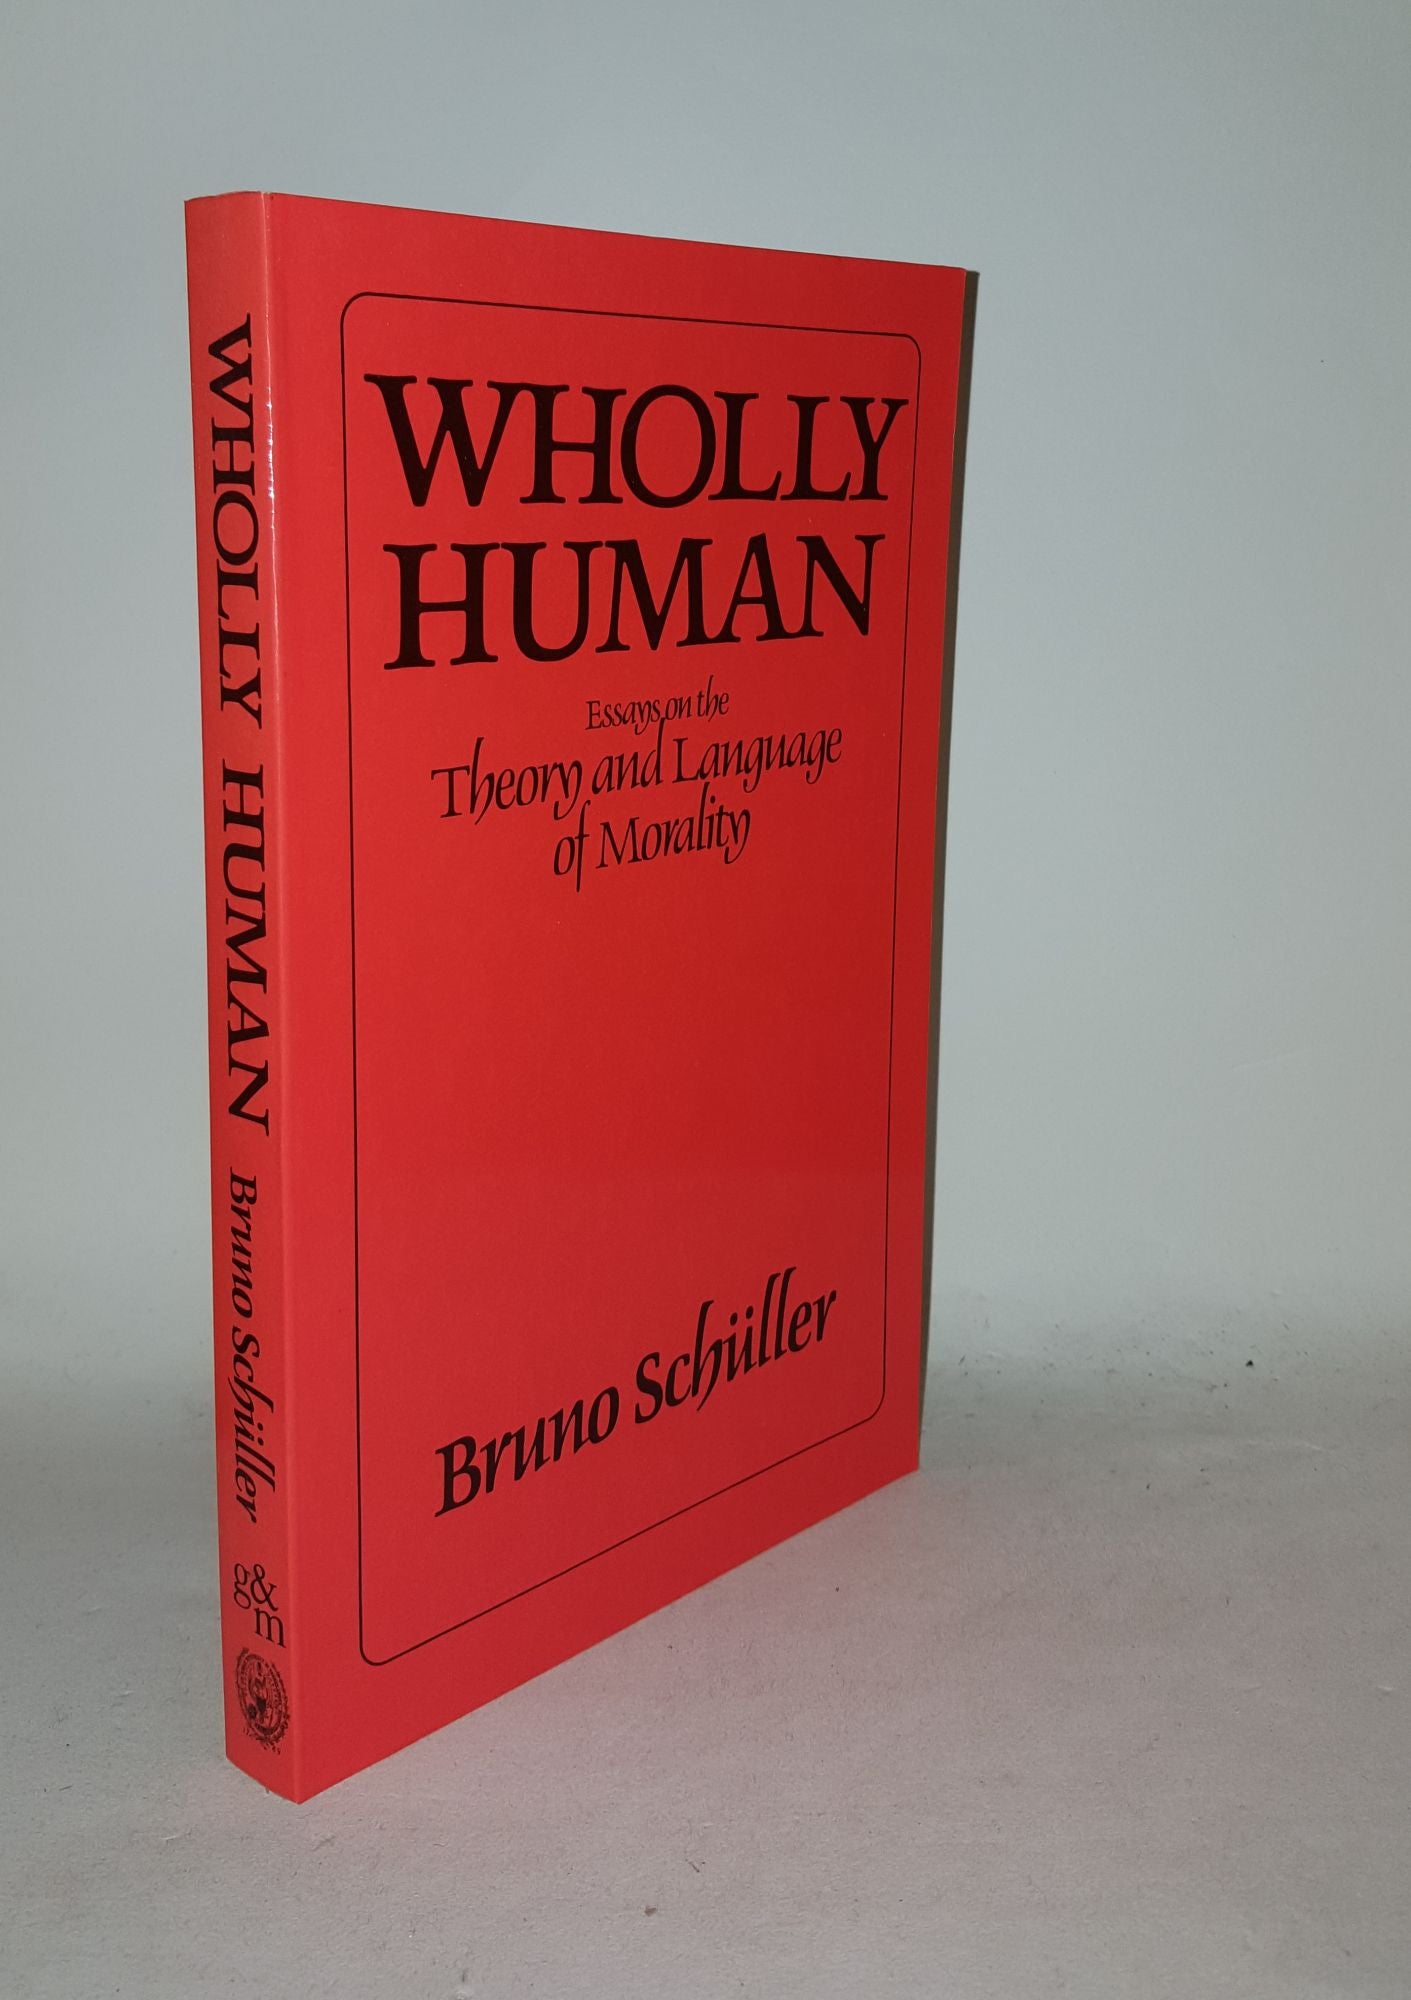 SCHULLER Bruno, HEINEGG Peter - Wholly Human Essays on the Theory and Language of Morality